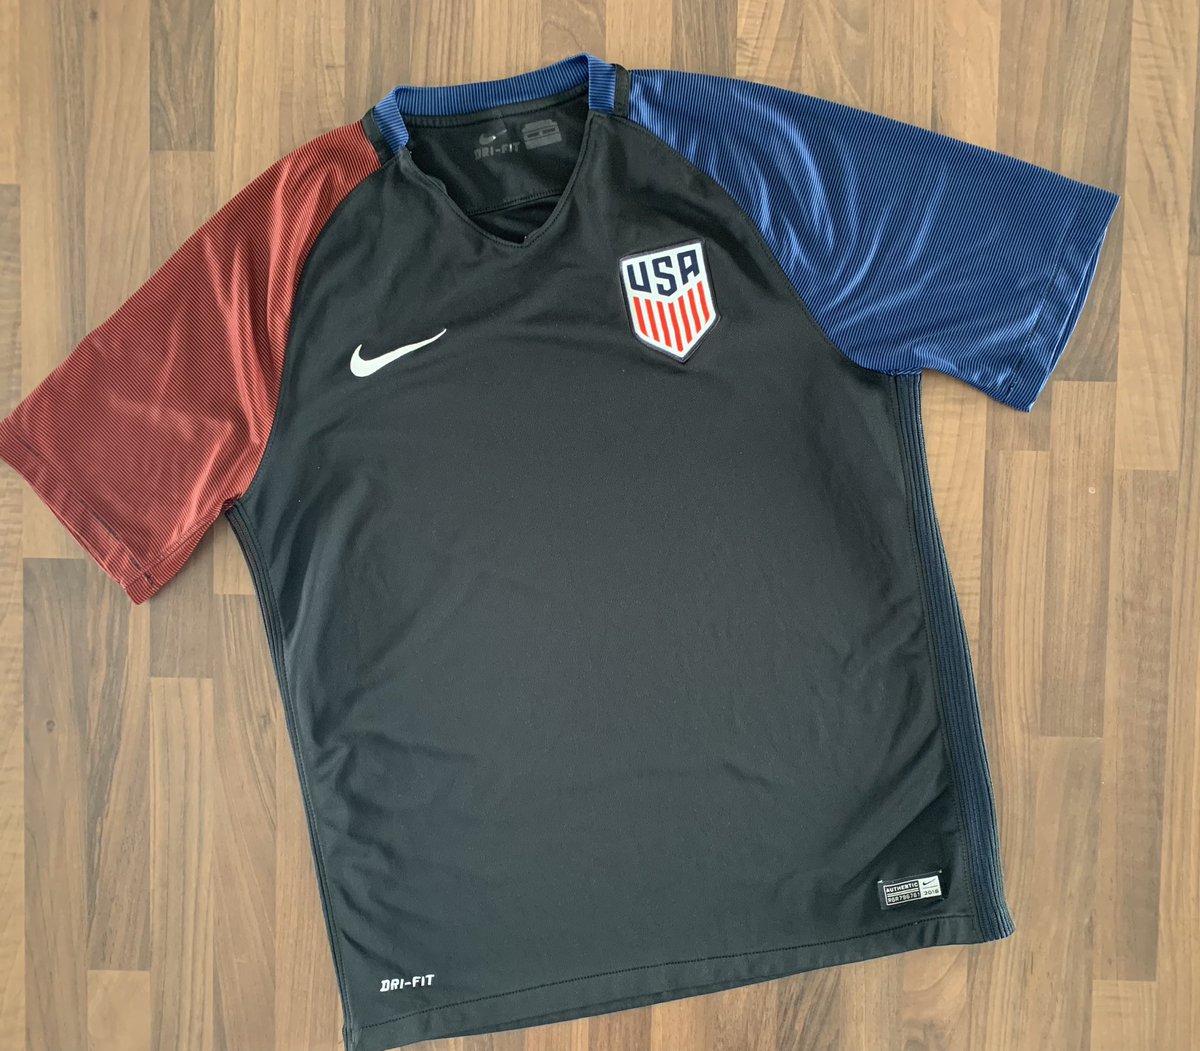 Last addition & it’s another @USMNT shirt.. 🇺🇸 2016-17 and a template featured heavily with England also using (hated that version)! Was never a massive fan of this, yet now it’s in hand I can appreciate the simplicity of it! #USAUSAUSA #USMNT